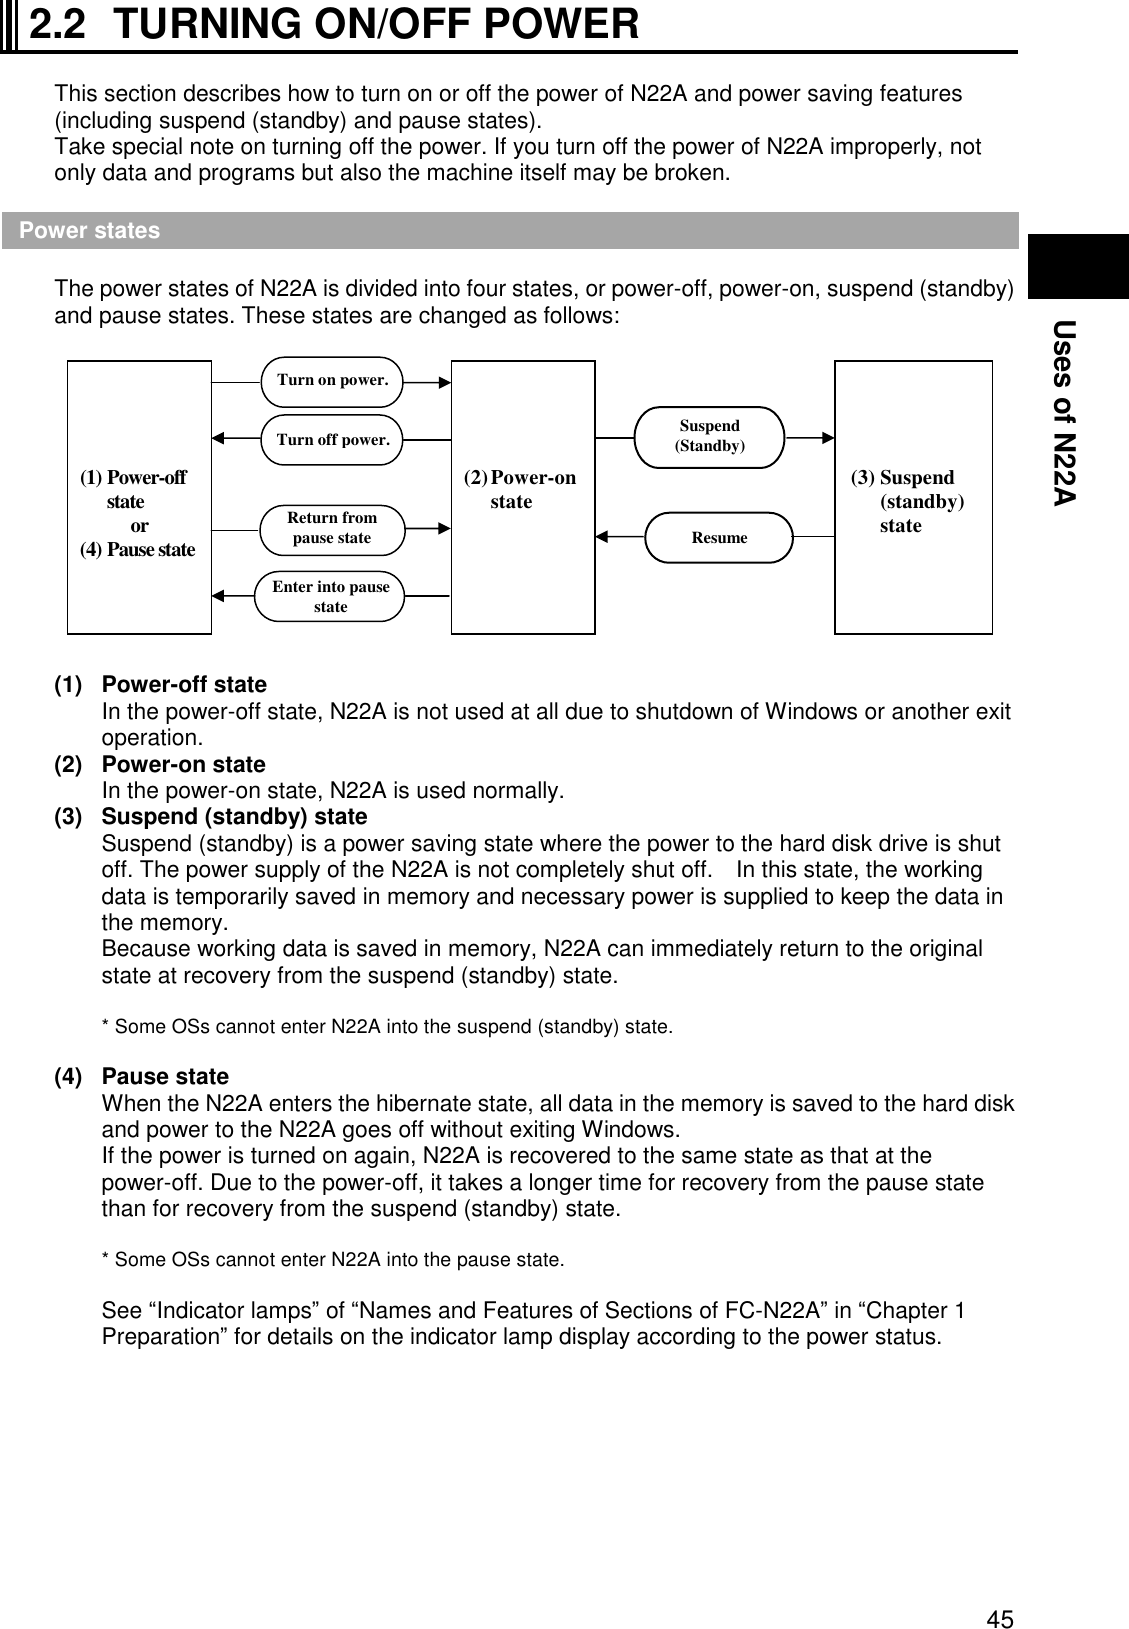  45 Uses of N22A 2.2  TURNING ON/OFF POWER  This section describes how to turn on or off the power of N22A and power saving features (including suspend (standby) and pause states). Take special note on turning off the power. If you turn off the power of N22A improperly, not only data and programs but also the machine itself may be broken.  Power states  The power states of N22A is divided into four states, or power-off, power-on, suspend (standby) and pause states. These states are changed as follows:              (1)  Power-off state   In the power-off state, N22A is not used at all due to shutdown of Windows or another exit operation. (2)  Power-on state   In the power-on state, N22A is used normally. (3)  Suspend (standby) state   Suspend (standby) is a power saving state where the power to the hard disk drive is shut off. The power supply of the N22A is not completely shut off.    In this state, the working data is temporarily saved in memory and necessary power is supplied to keep the data in the memory.   Because working data is saved in memory, N22A can immediately return to the original state at recovery from the suspend (standby) state.  * Some OSs cannot enter N22A into the suspend (standby) state.  (4)  Pause state   When the N22A enters the hibernate state, all data in the memory is saved to the hard disk and power to the N22A goes off without exiting Windows. If the power is turned on again, N22A is recovered to the same state as that at the power-off. Due to the power-off, it takes a longer time for recovery from the pause state than for recovery from the suspend (standby) state.  * Some OSs cannot enter N22A into the pause state.    See “Indicator lamps” of “Names and Features of Sections of FC-N22A” in “Chapter 1 Preparation” for details on the indicator lamp display according to the power status.         (1) Power-off state or (4) Pause state     (2) Power-on state     (3) Suspend (standby) state Turn on power. Turn off power. Suspend (Standby) Resume Return from pause state Enter into pause state 